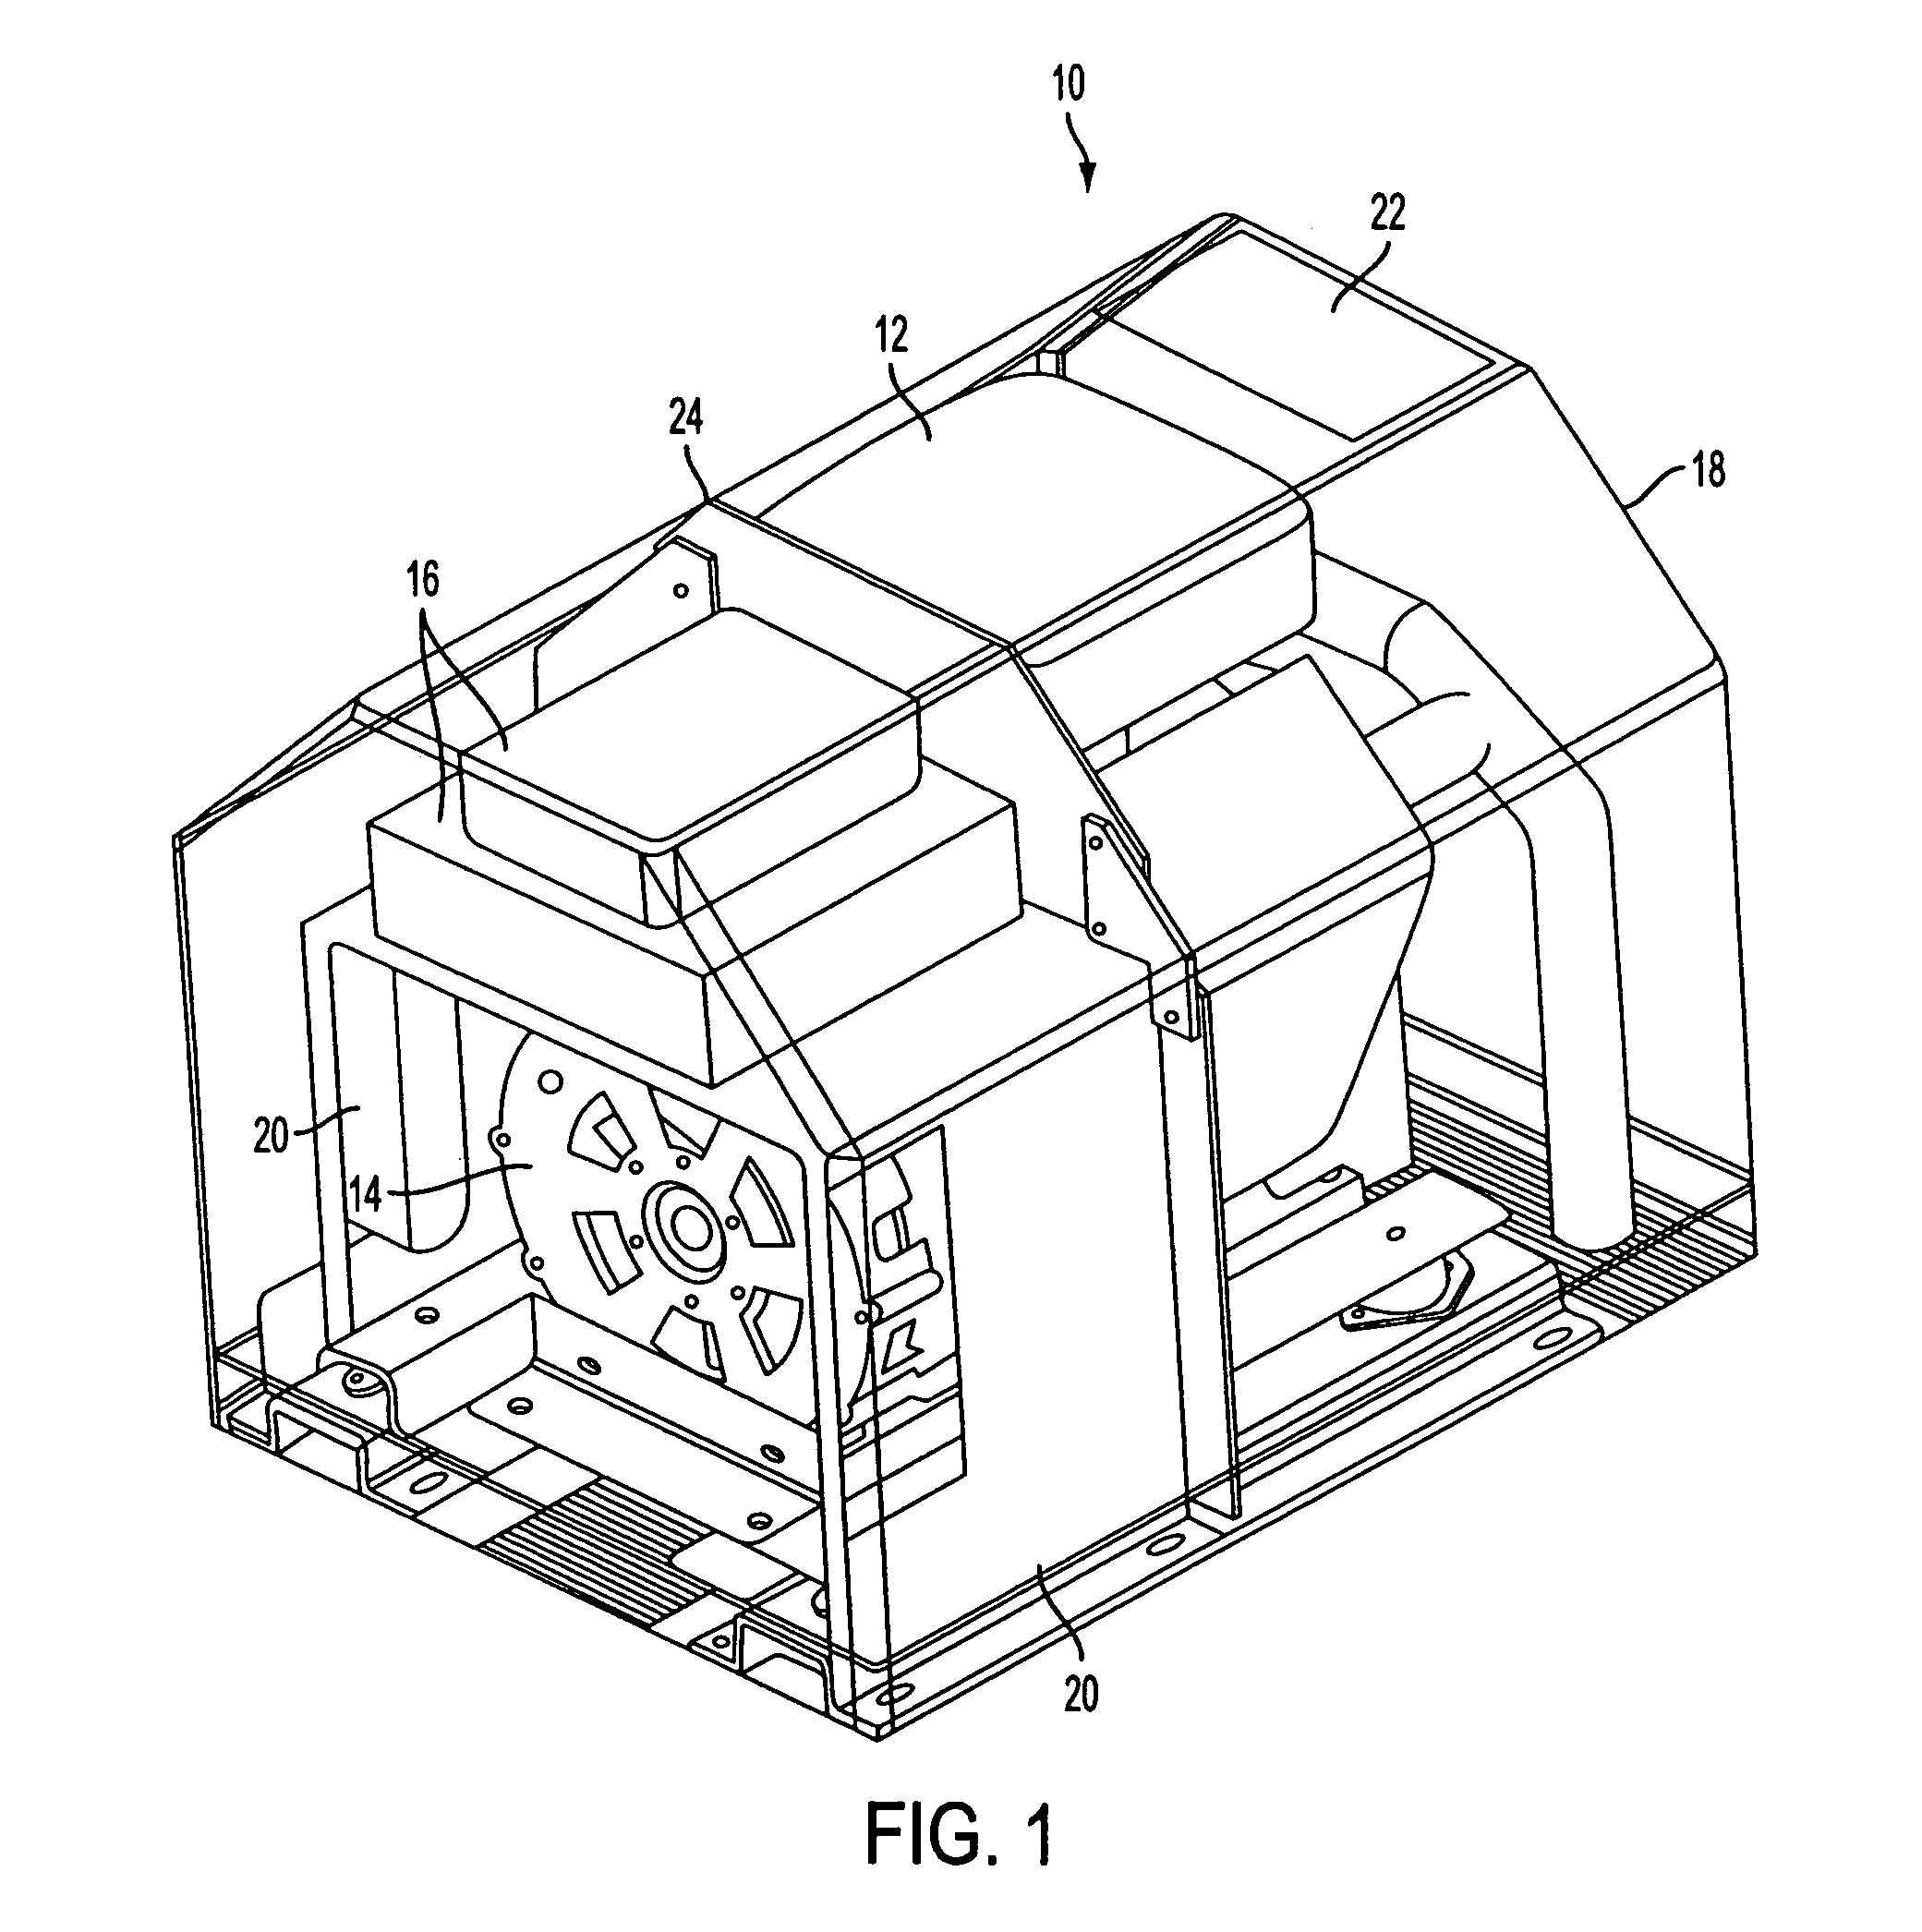 Portable range extender with autonomous control of starting and stopping operations